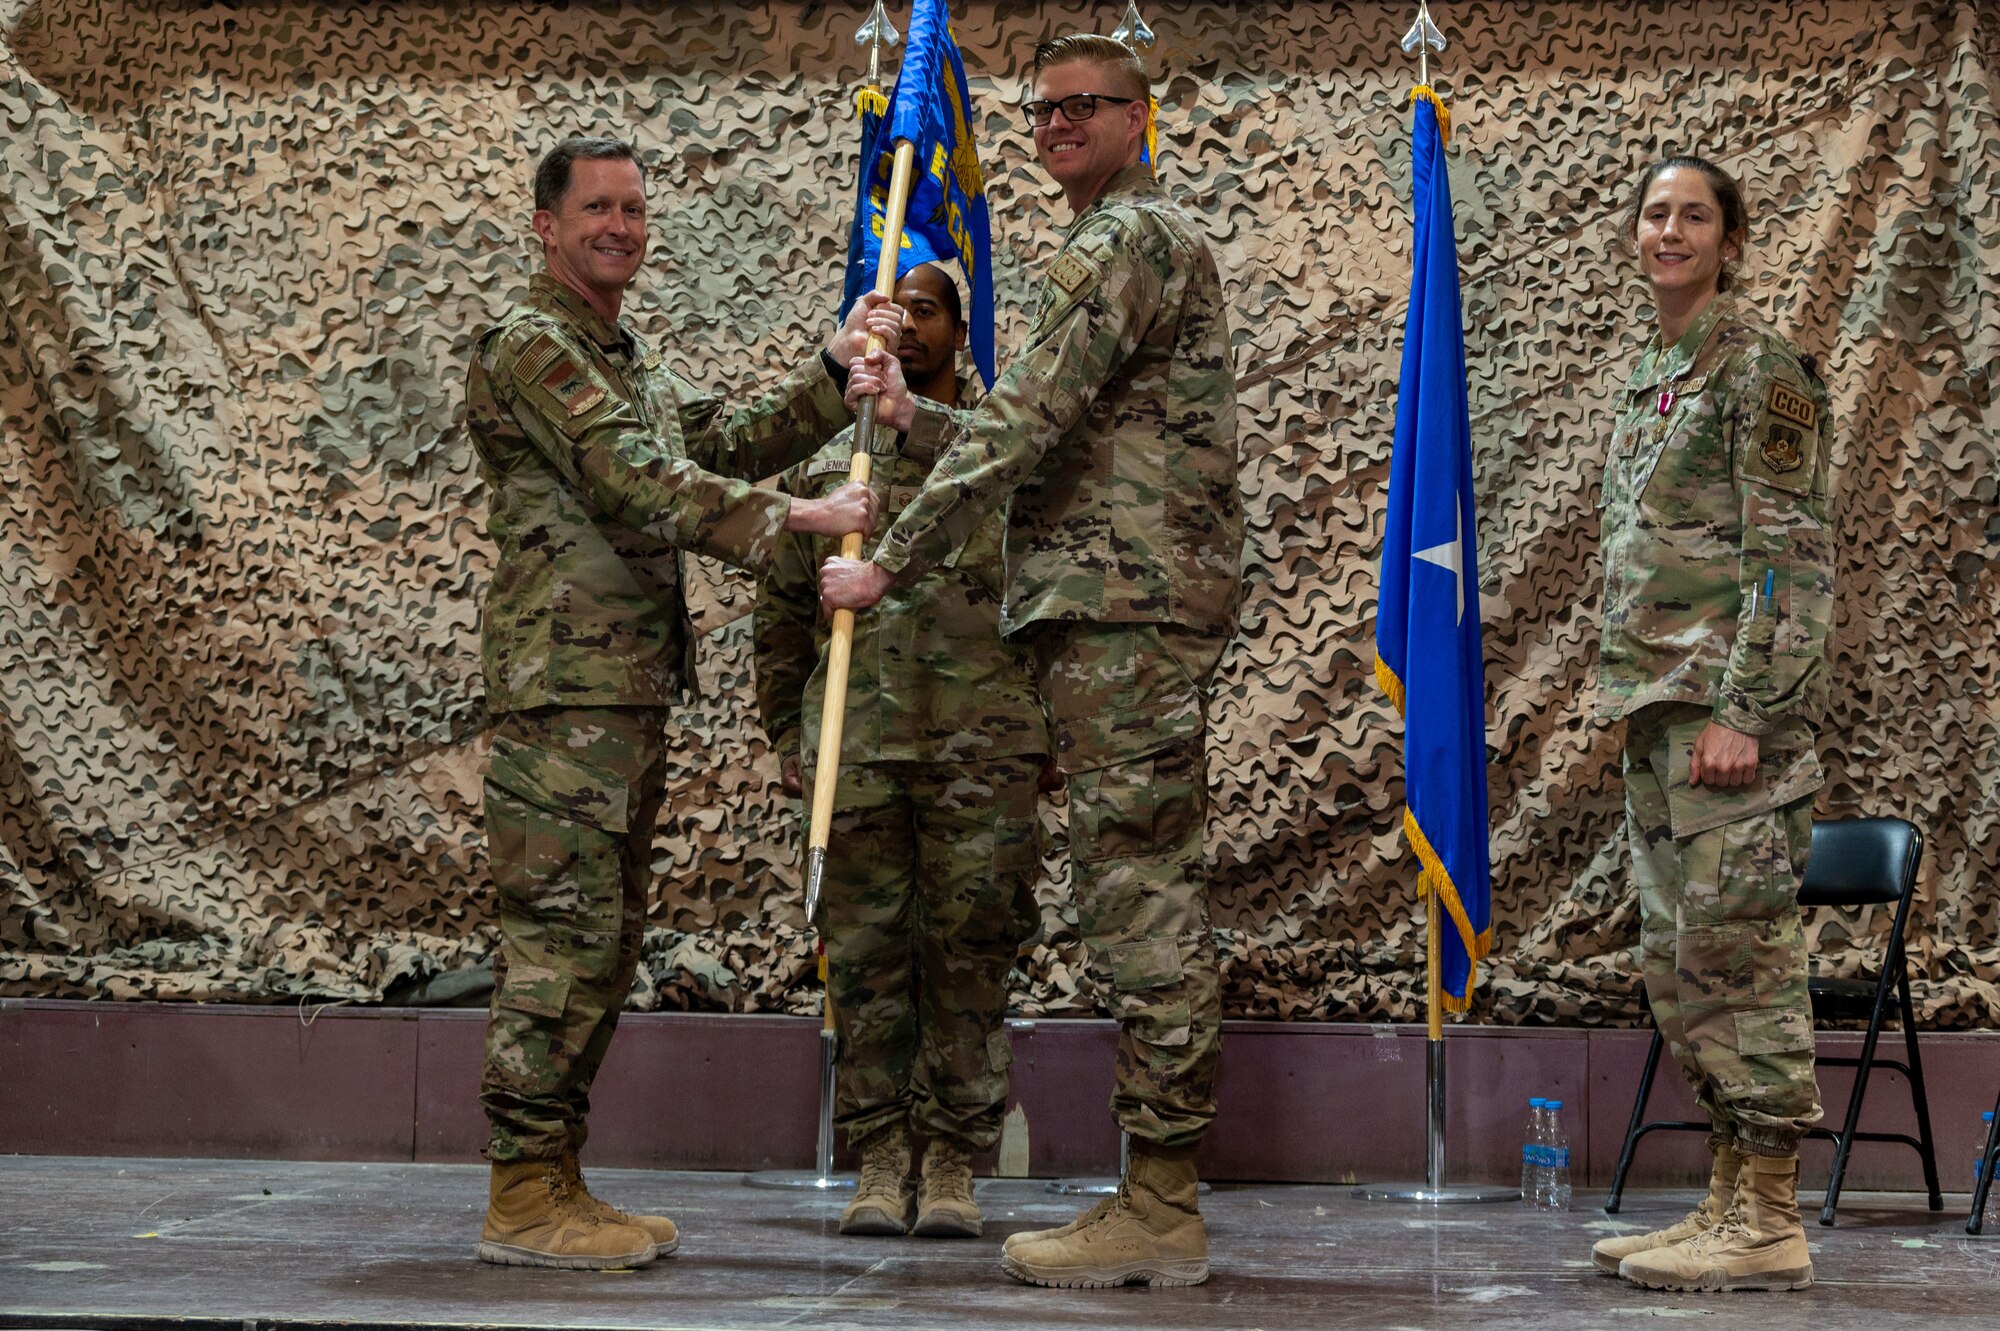 U.S. Air Force Brig. Gen. Christopher Sage, 332d Air Expeditionary Wing commander, exchanges the 332d Expeditionary Contracting Squadron guidon with U.S. Air Force Major Daniel P. Monroe, 332d ECONS incoming commander, during a change of command ceremony at an undisclosed location in Southwest Asia, June 4, 2022. A change of command ceremony is a tradition that represents a formal transfer of authority and responsibility from the outgoing commander to the incoming commander. (U.S. Air Force photo by Tech. Sgt. Lauren M. Snyder)